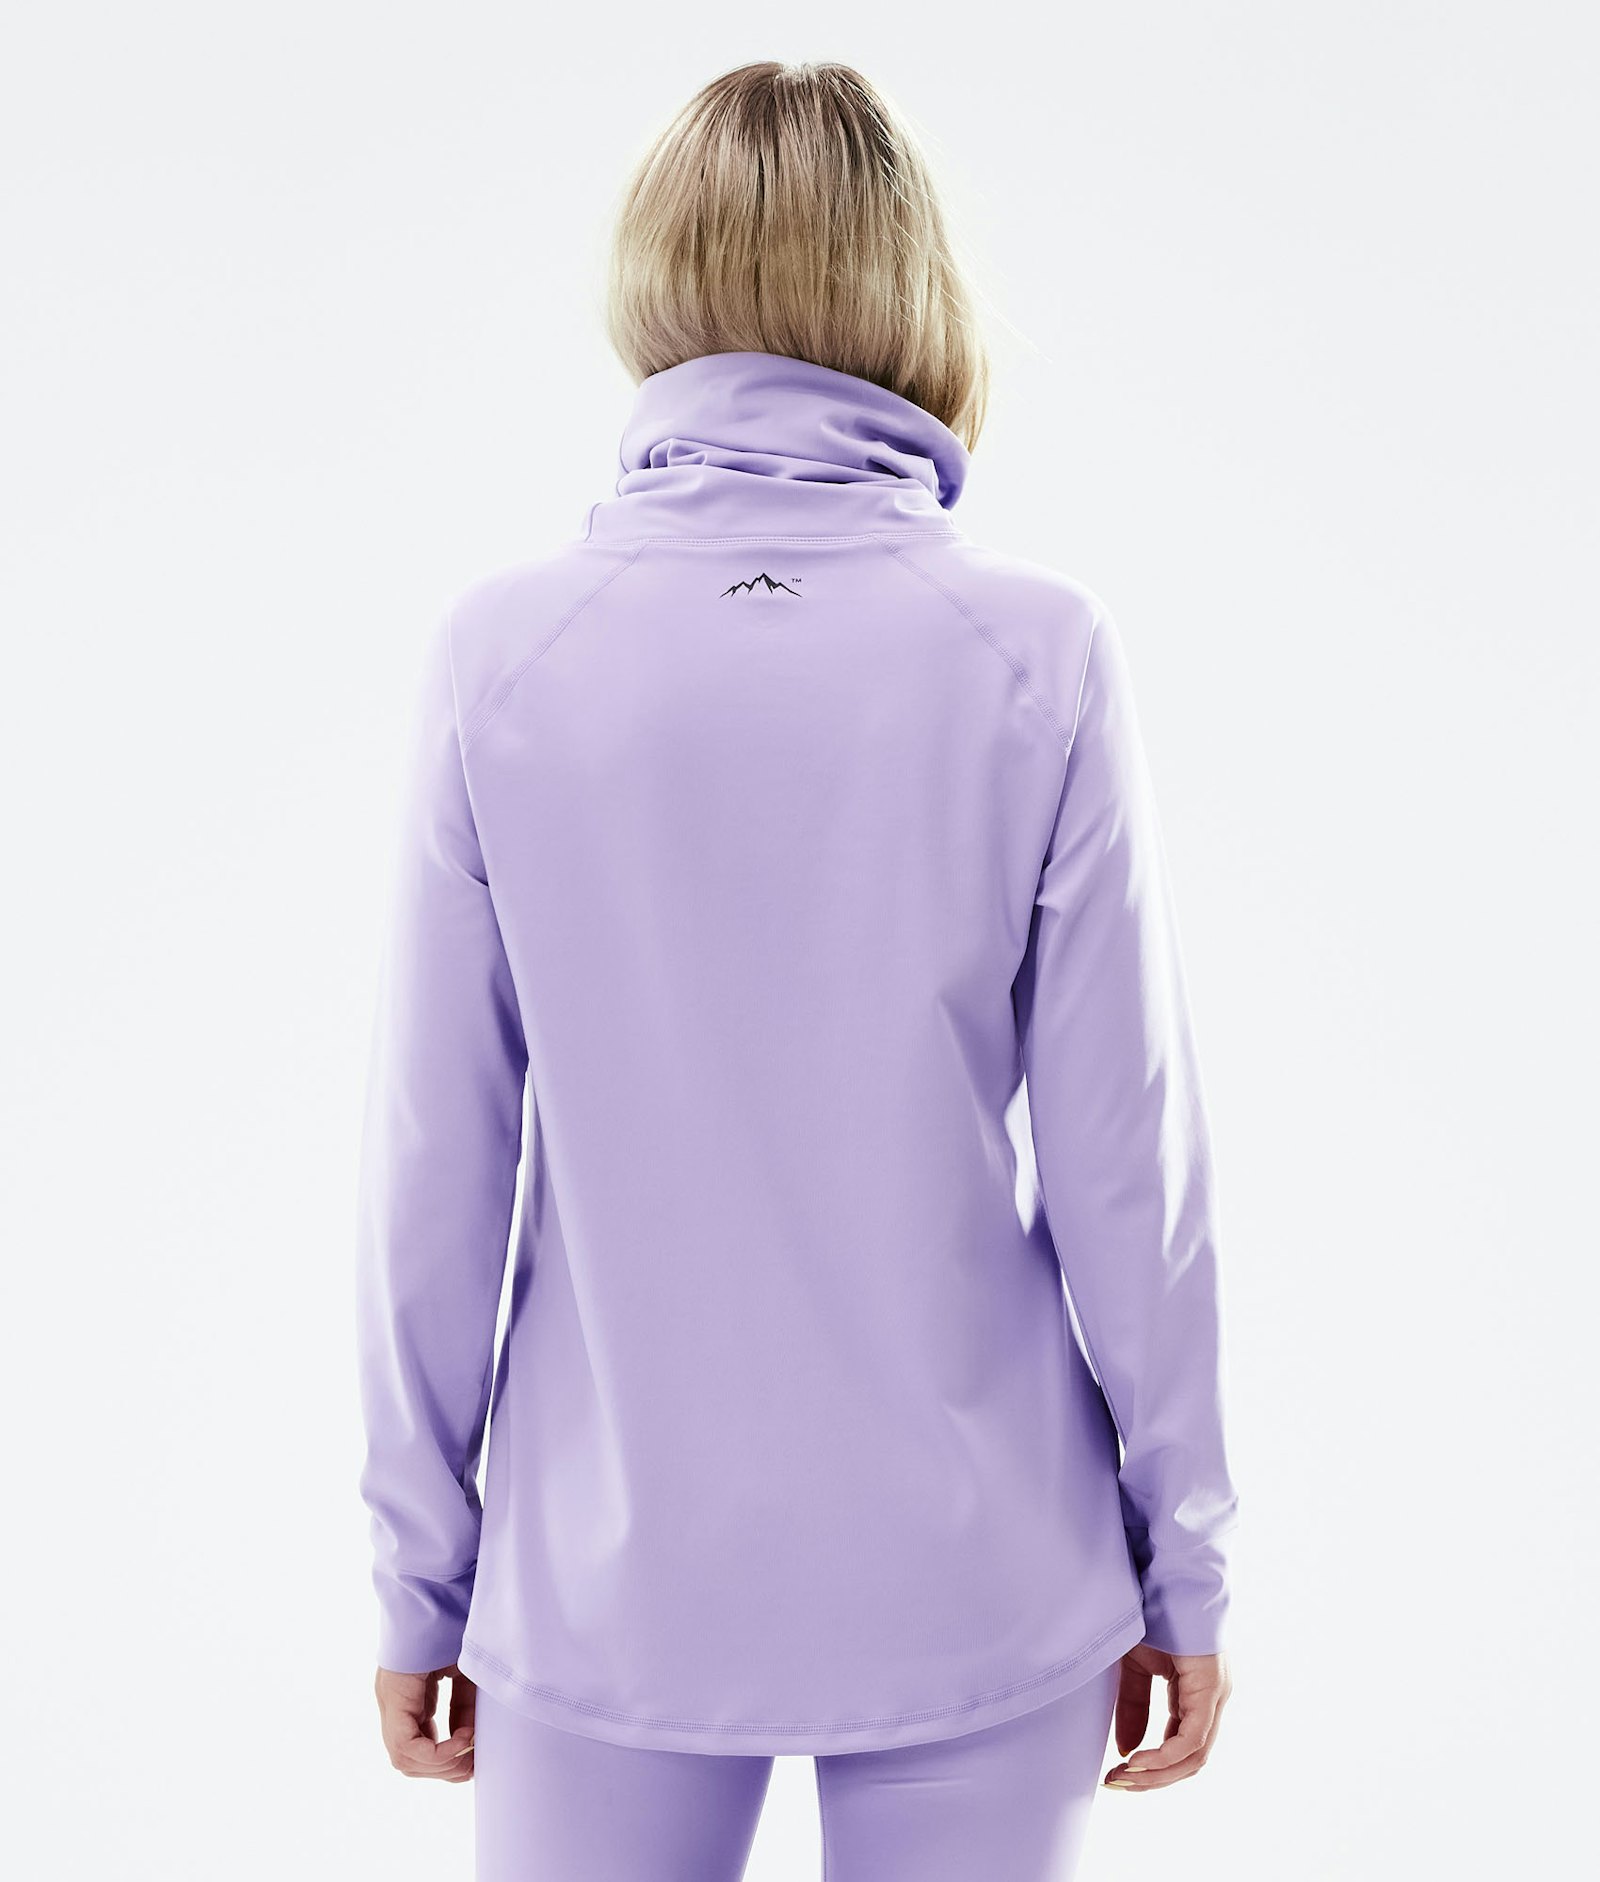 Snuggle W Base Layer Top Women 2X-Up Faded Violet